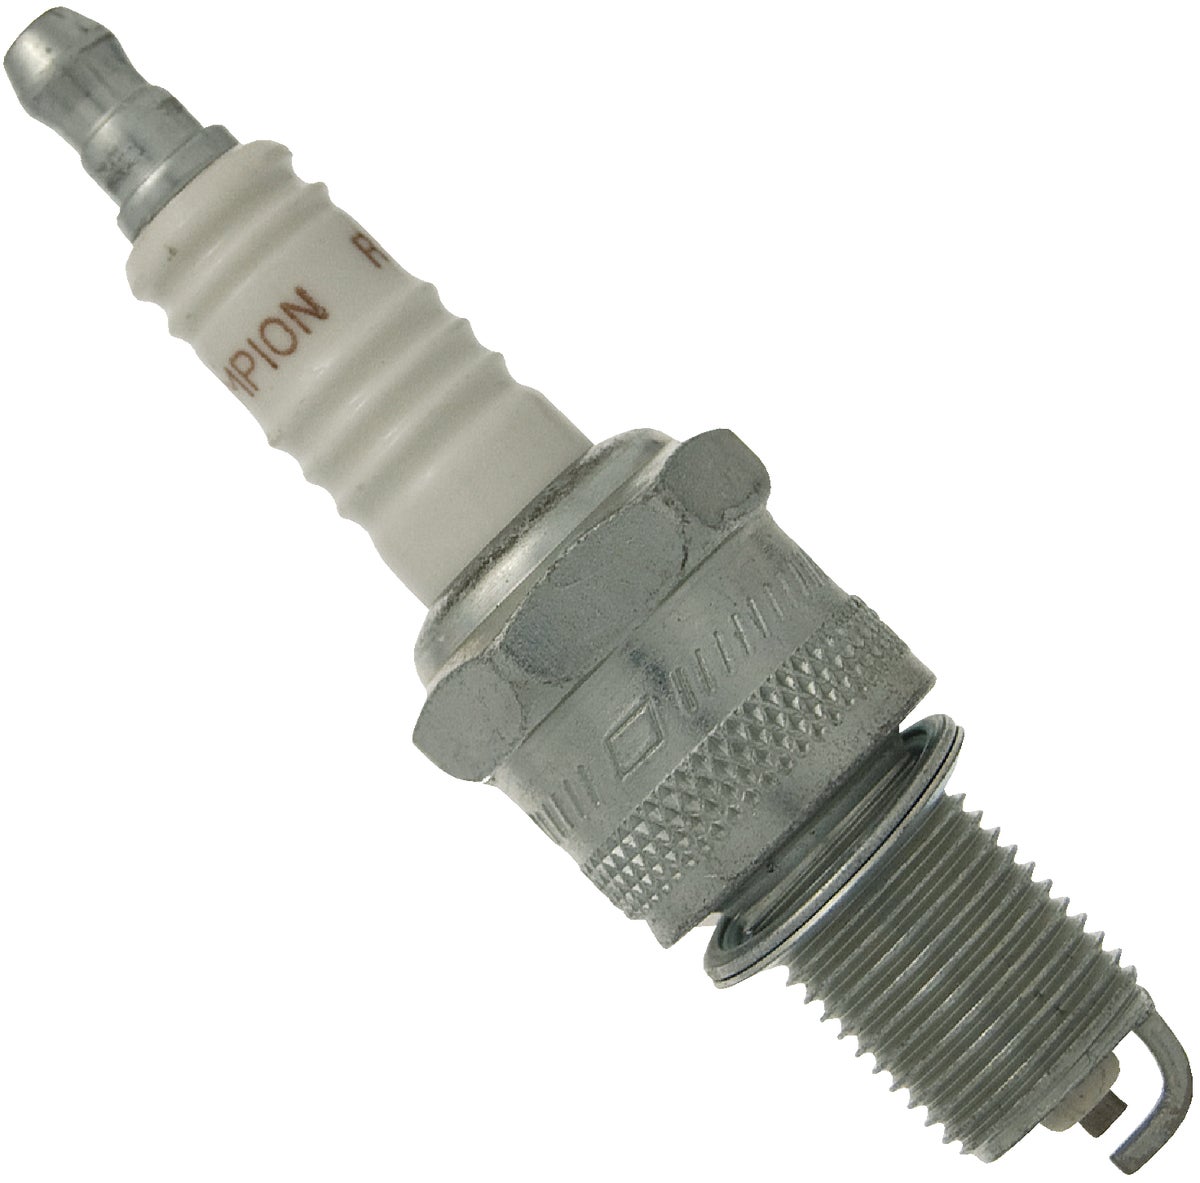 Champion Spark Plug Copper Plus 322 Rn11yc4 for Small Engines 